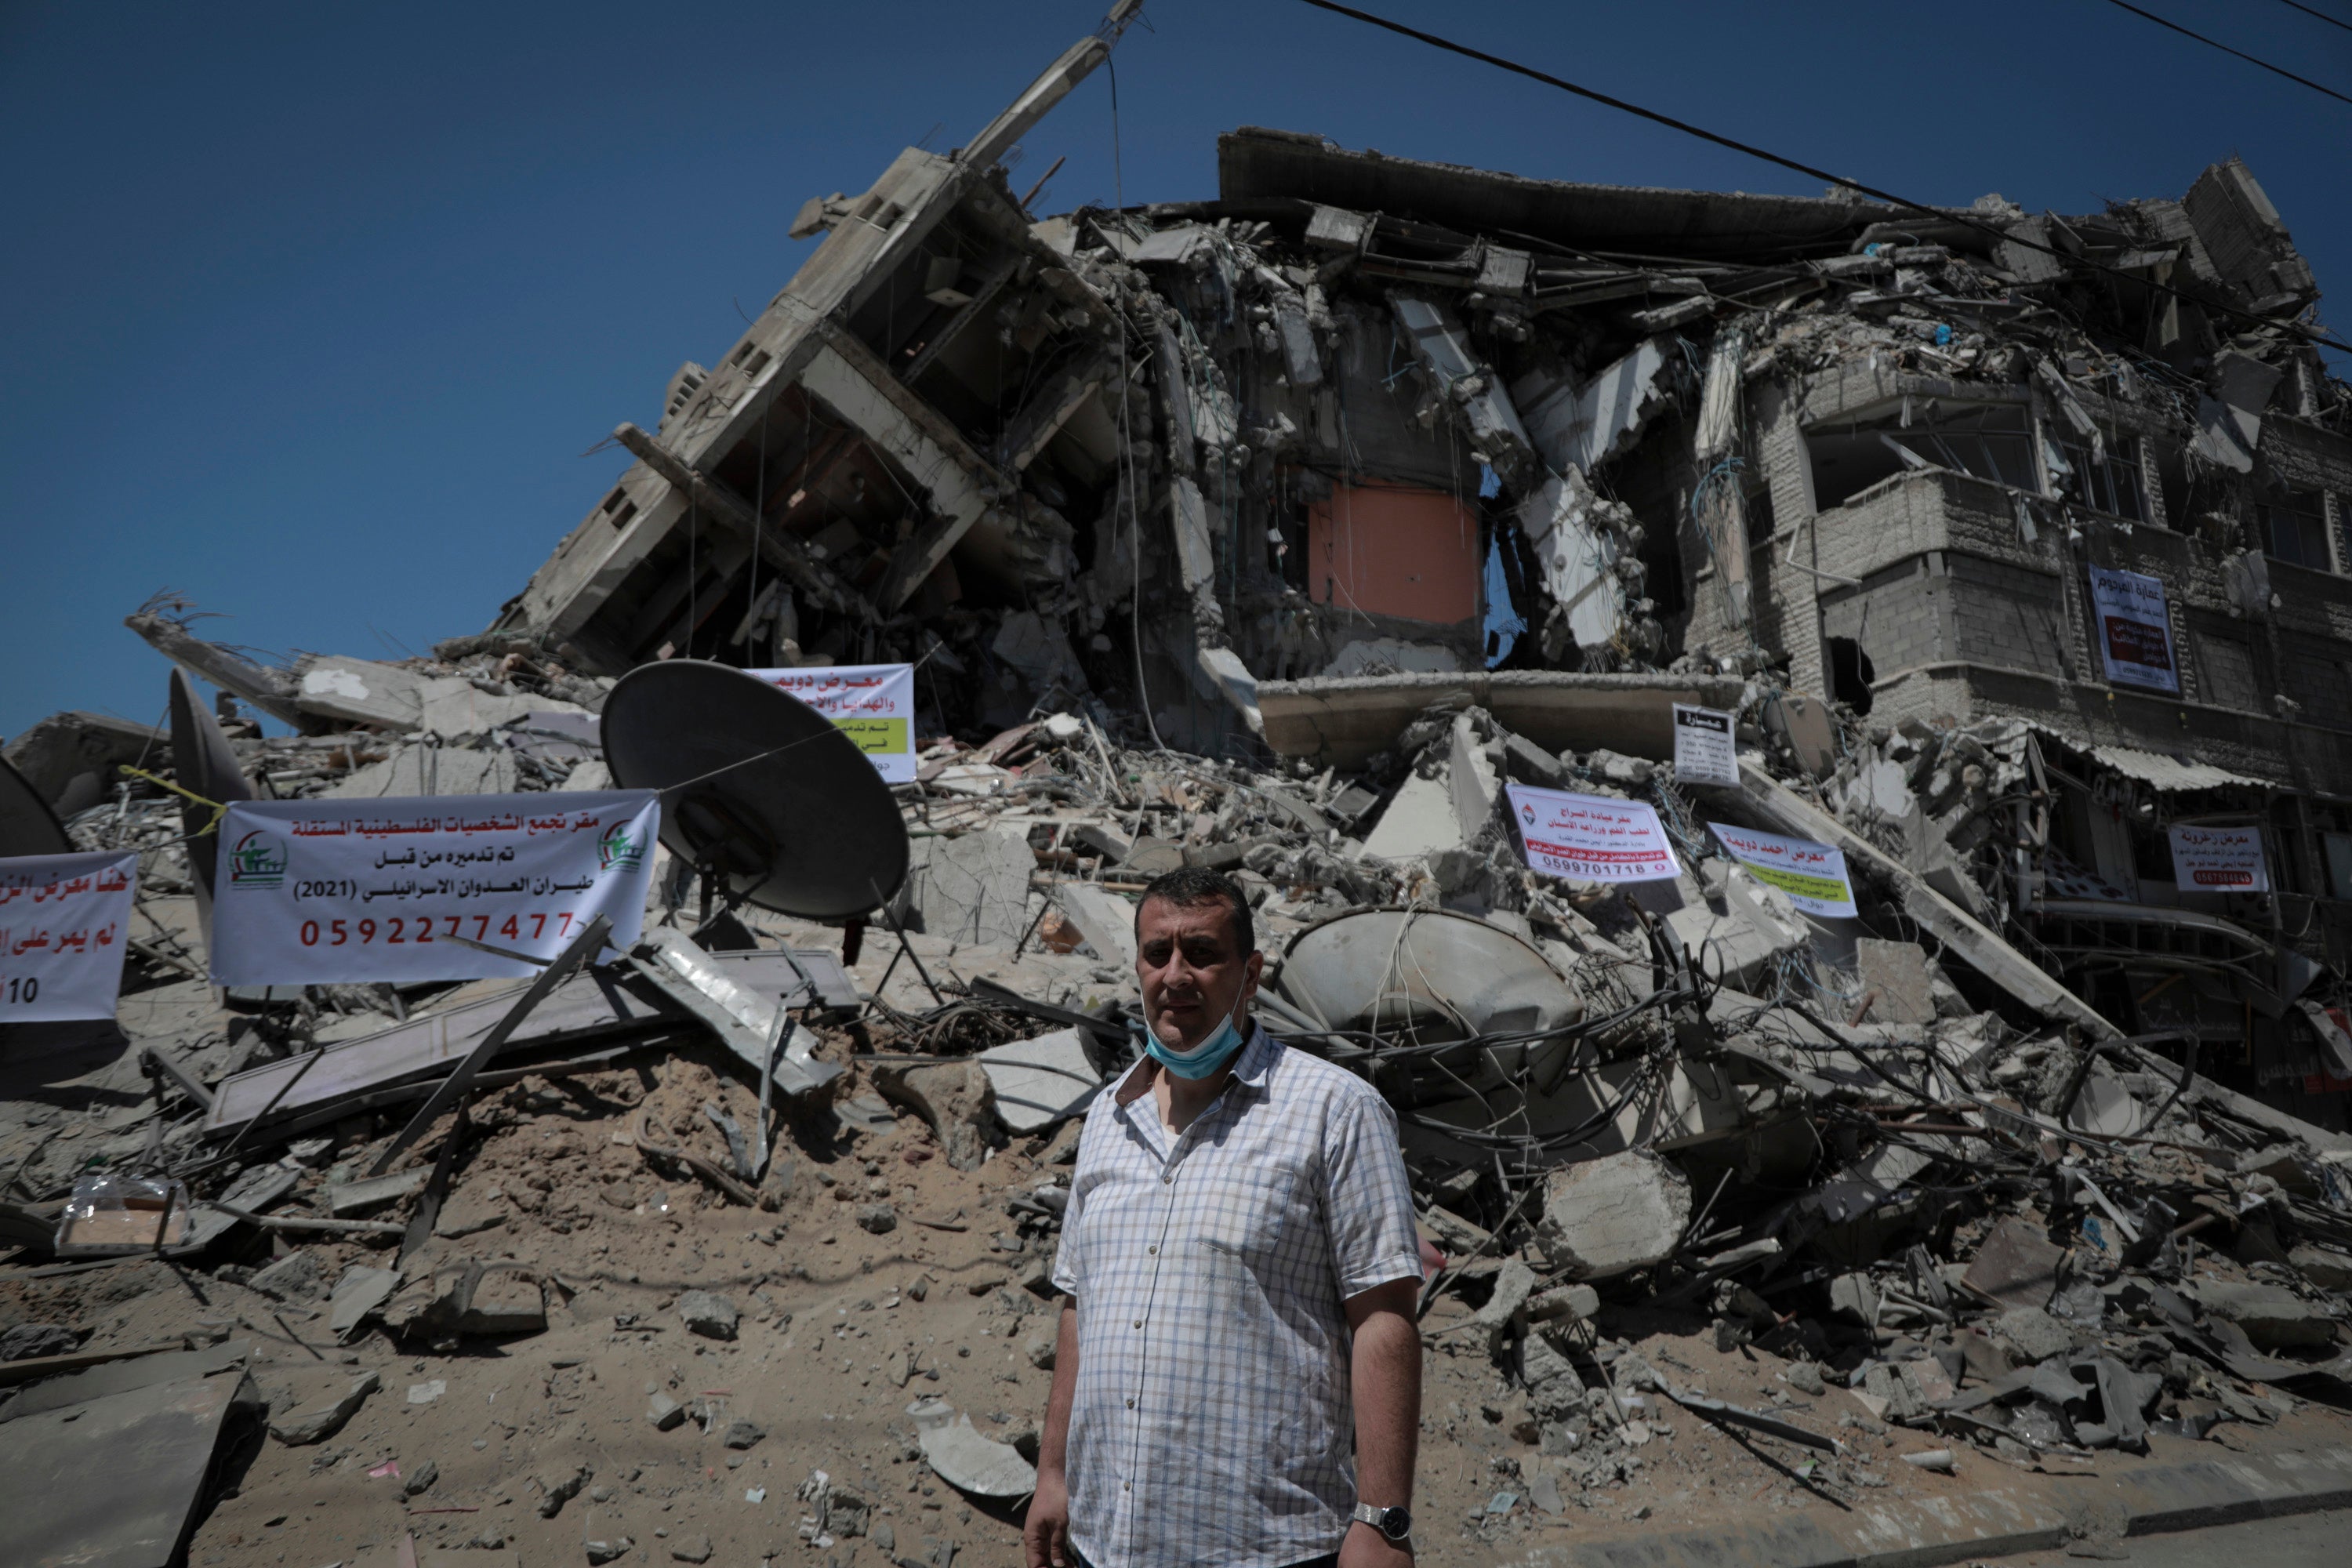 Naji Dwaima, owner of Dwaima's for Watches, stands in front of the rubble of his shop in Gaza City